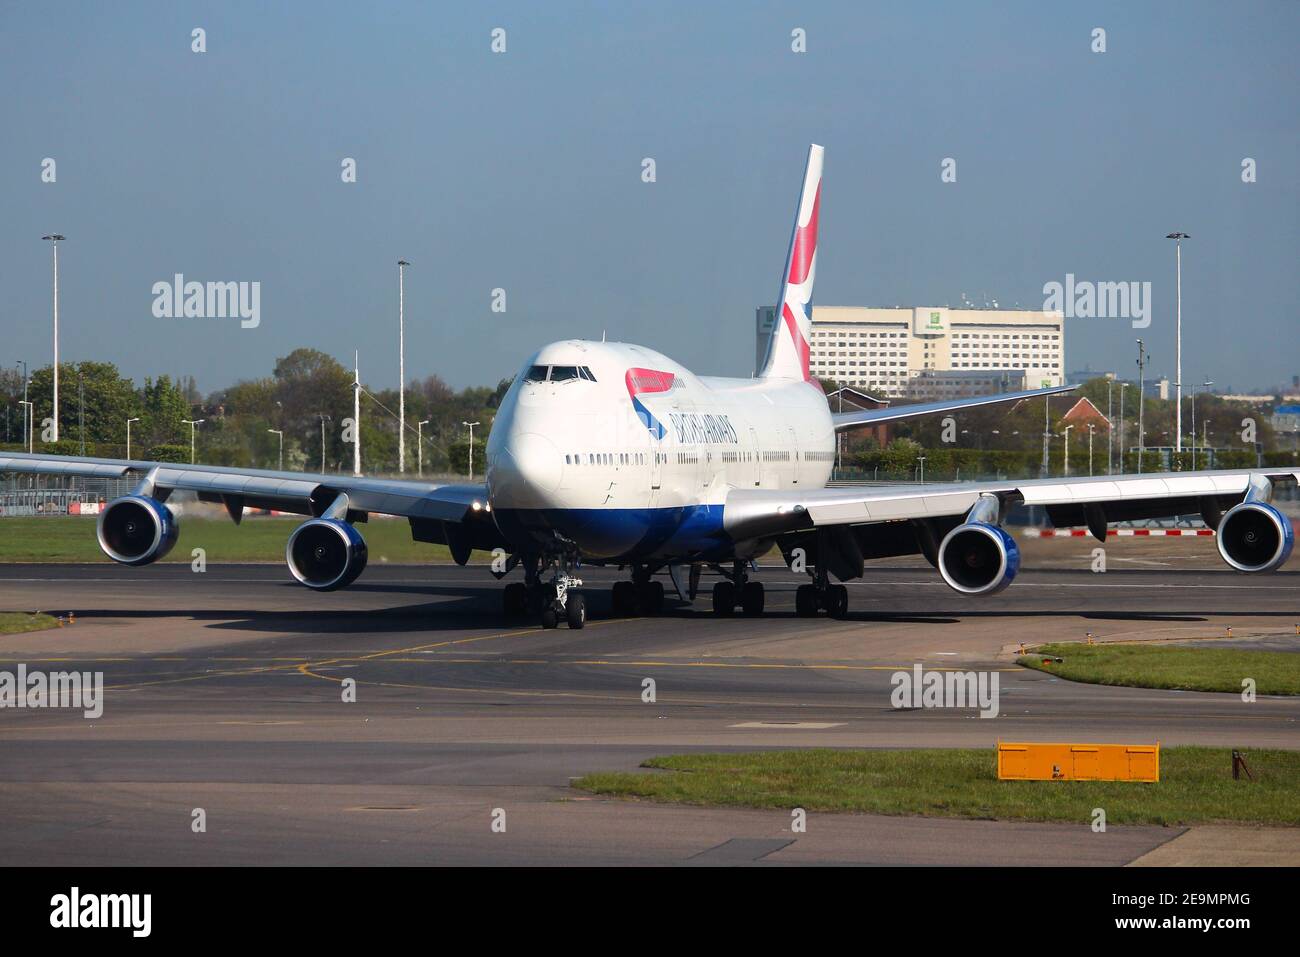 LONDON, UK - APRIL 16, 2014: British Airways Boeing 747 after landing at London Heathrow airport. BA operates fleet of 283 aircraft (largest in the UK Stock Photo